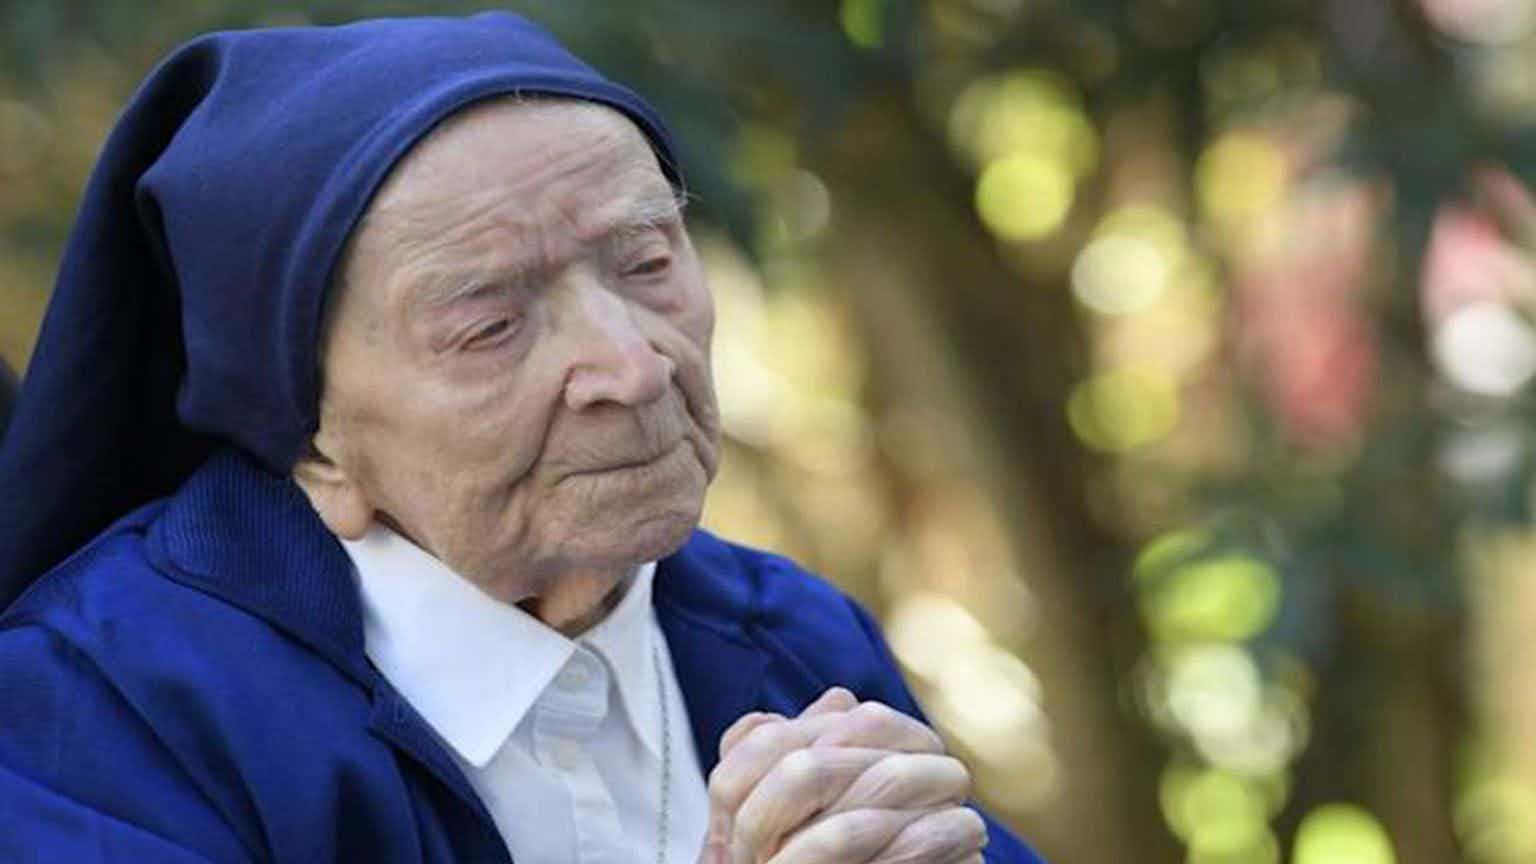 Sister Andre, 118 years old, is the oldest living person photo Yahoo News